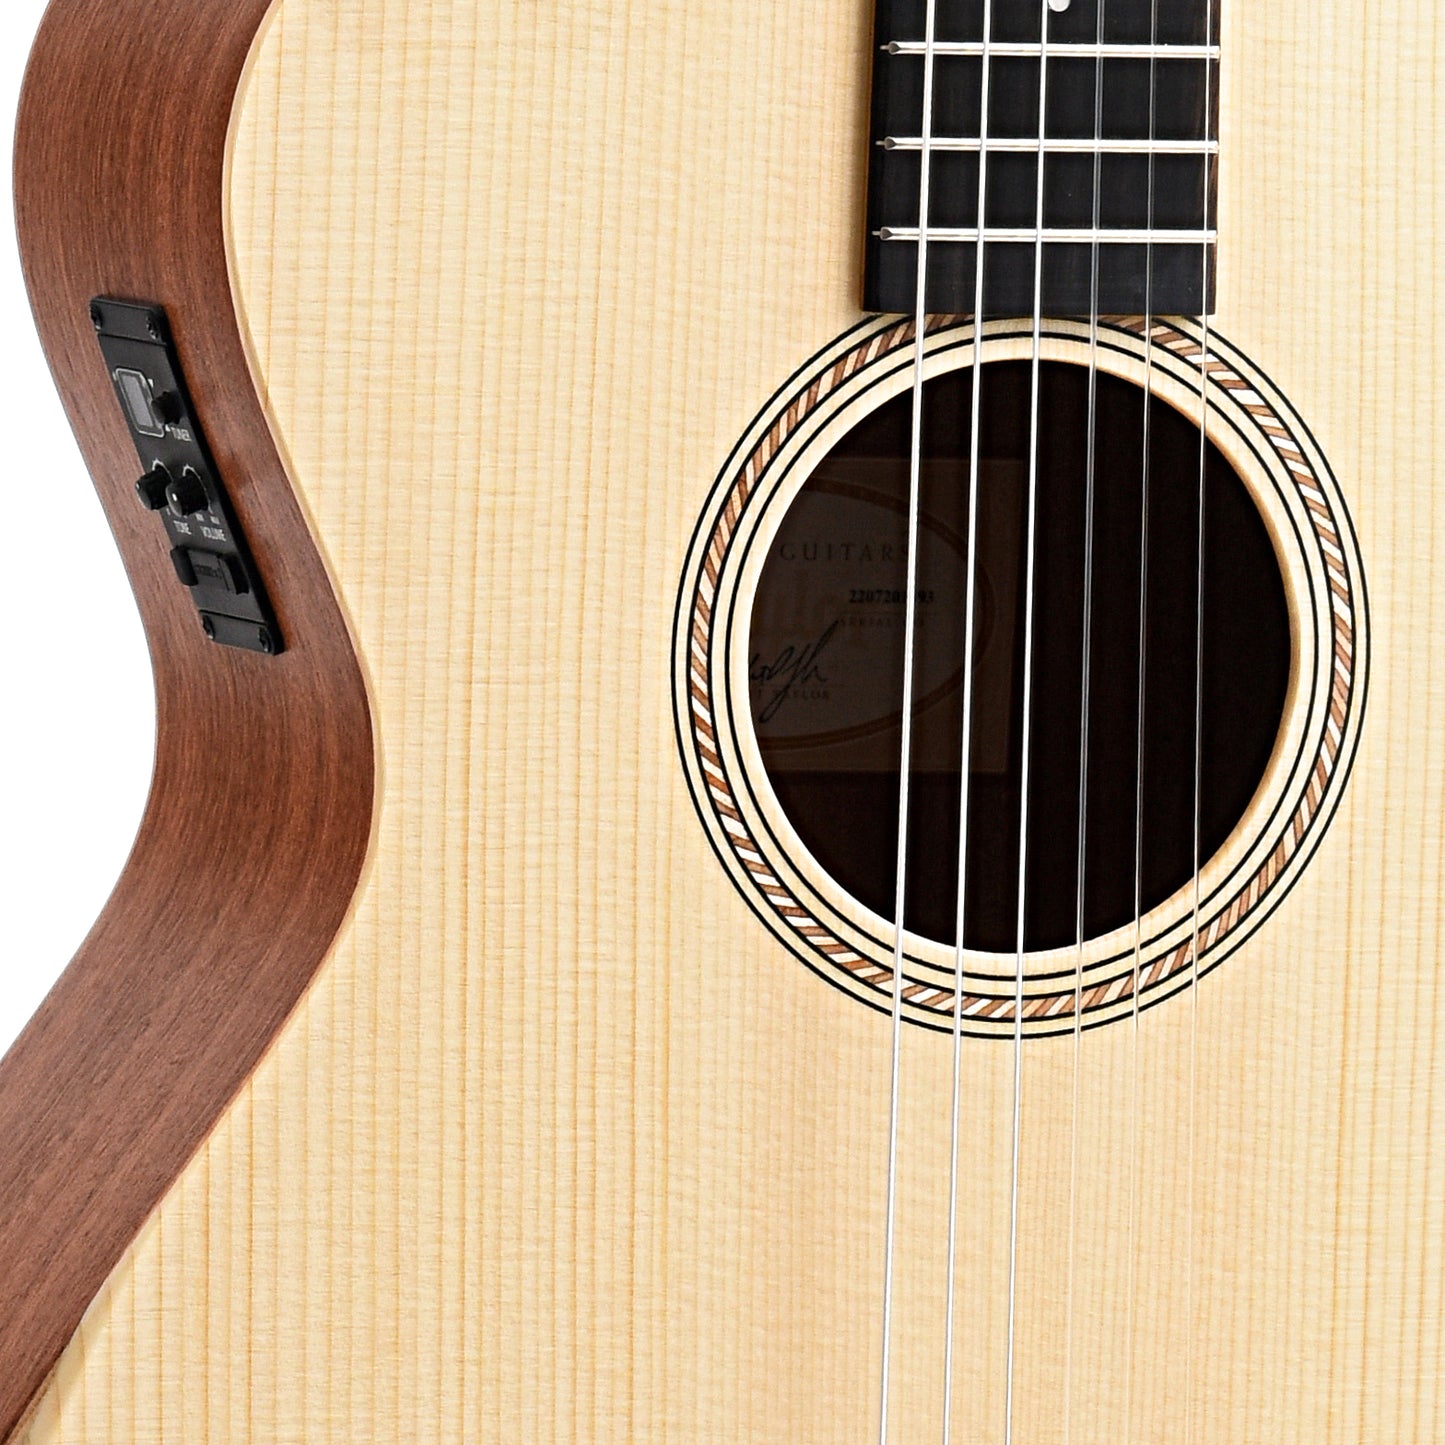 Sounhole and controls of Taylor Academy 12e-N Nylon String Acoustic